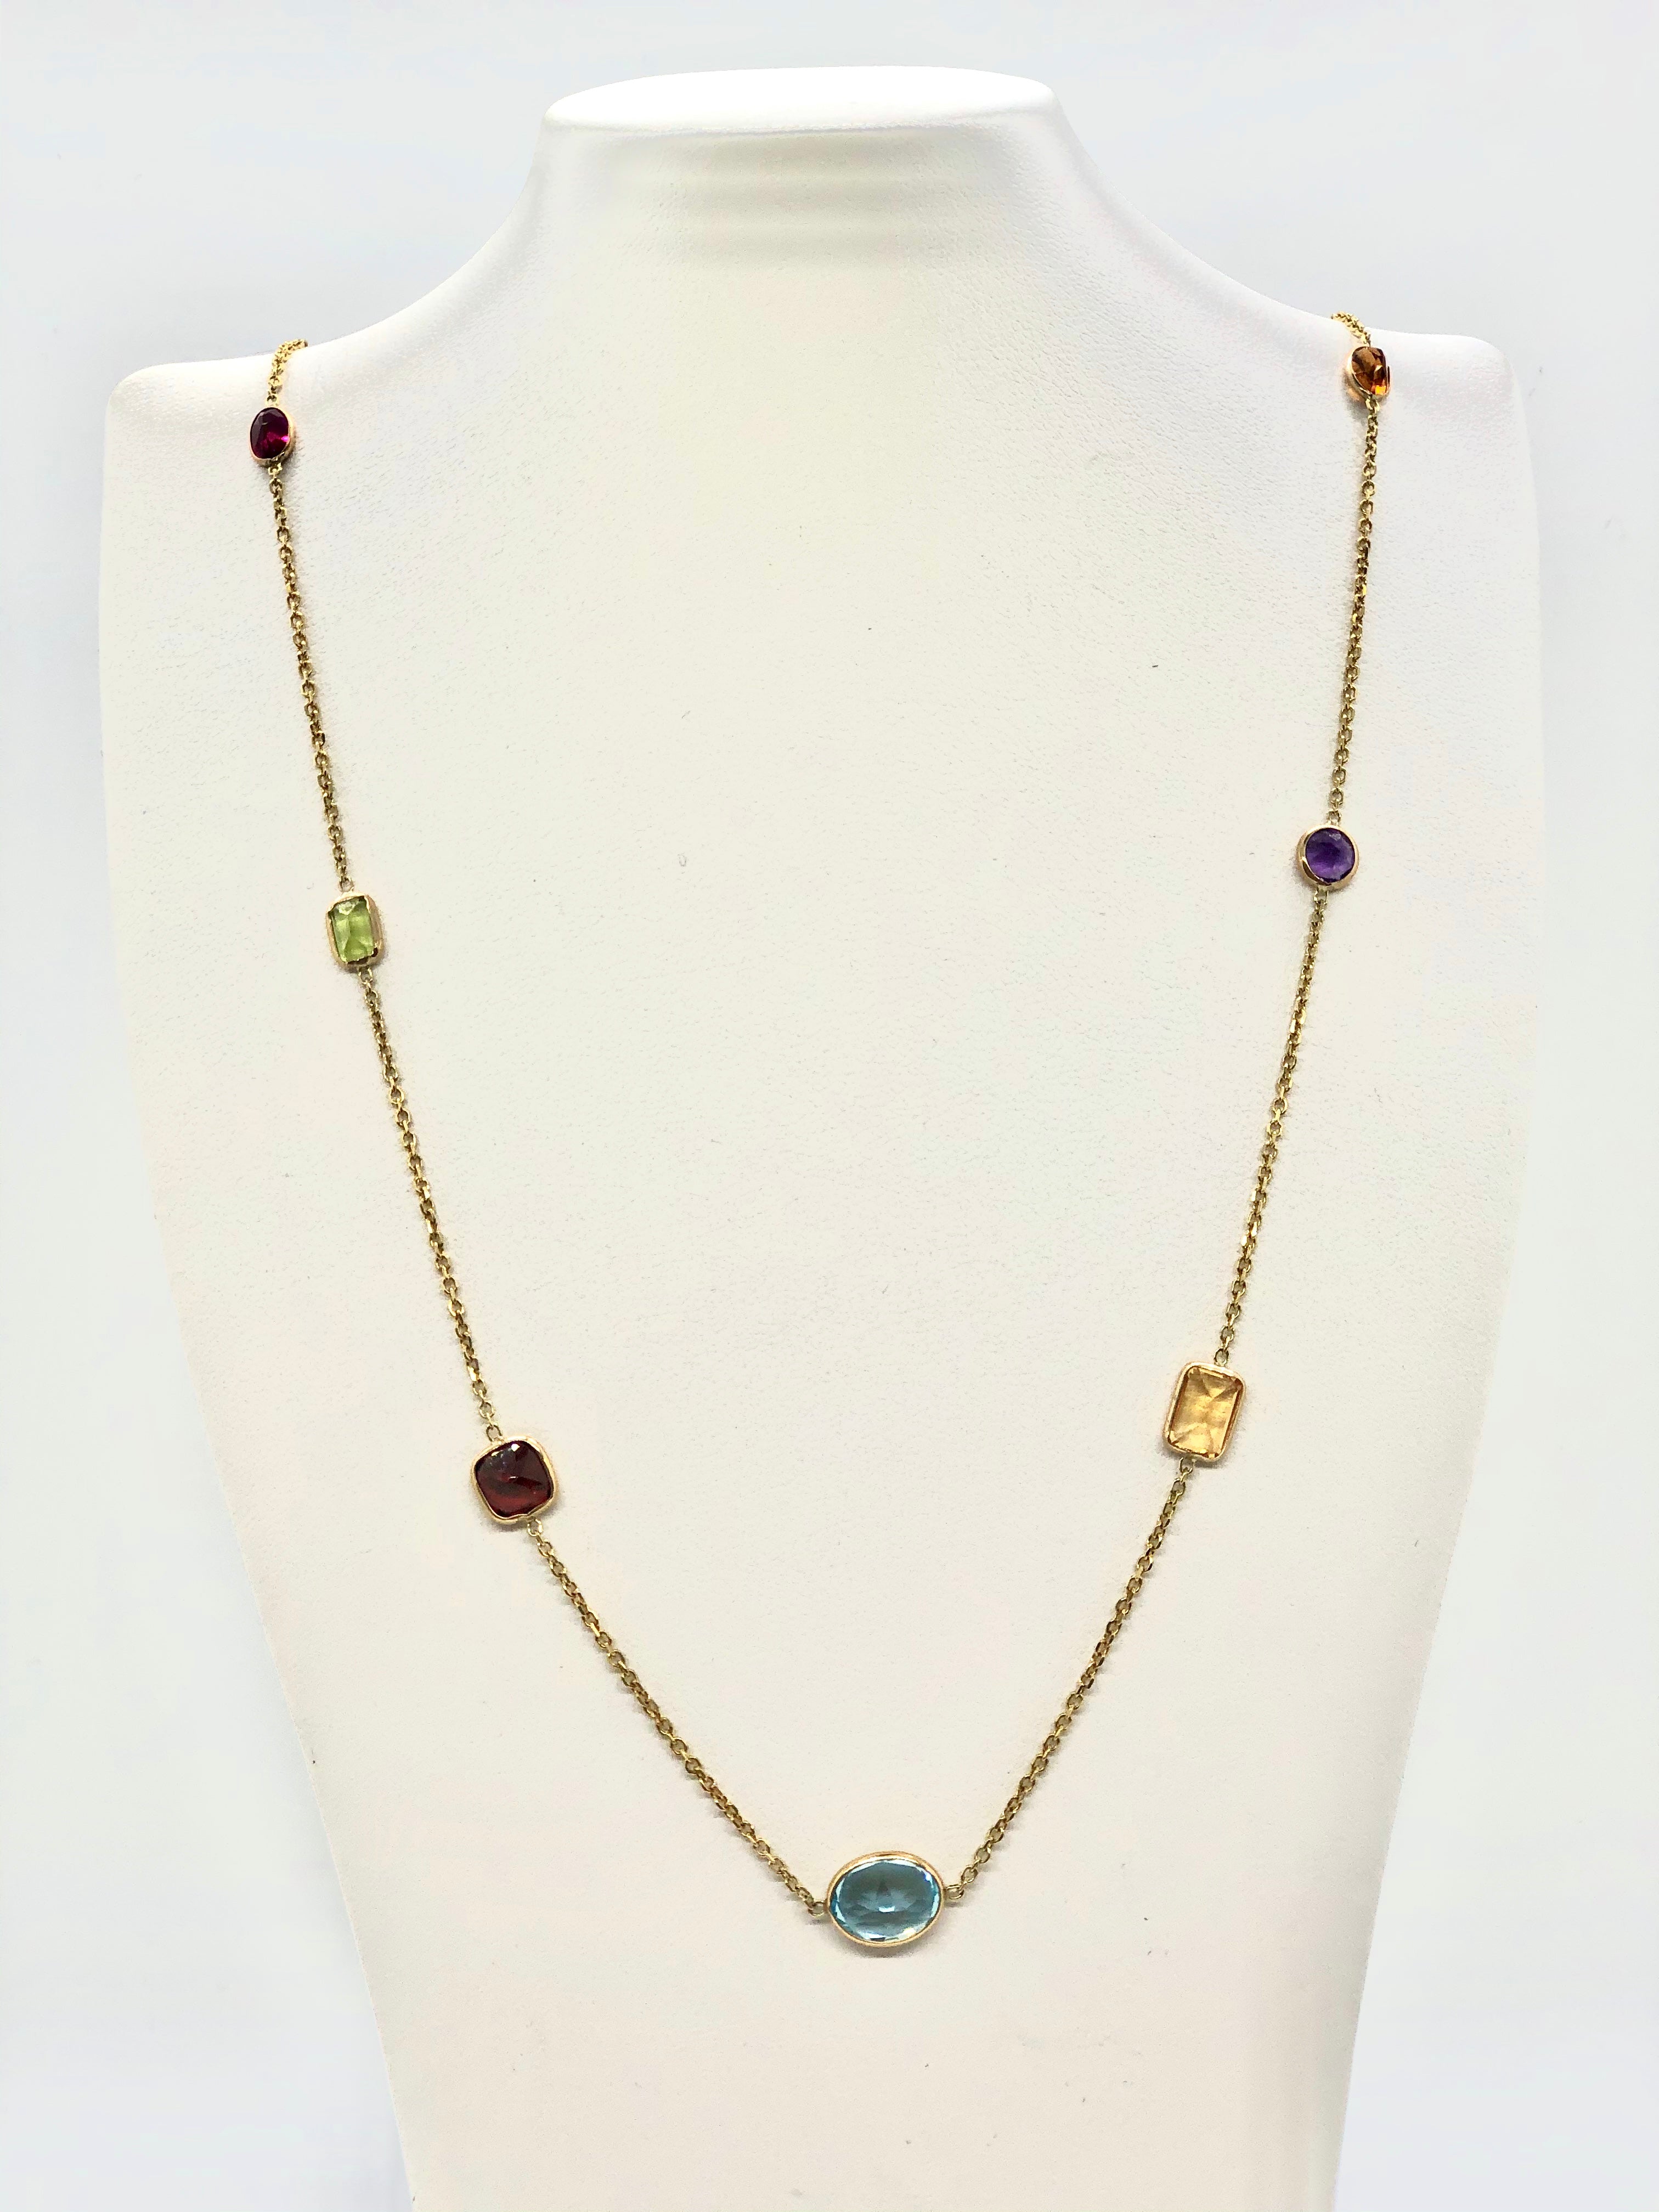 Buy Long Colorful Multi-Gemstone Necklace 18K Gold, 44.80 CTW, 31